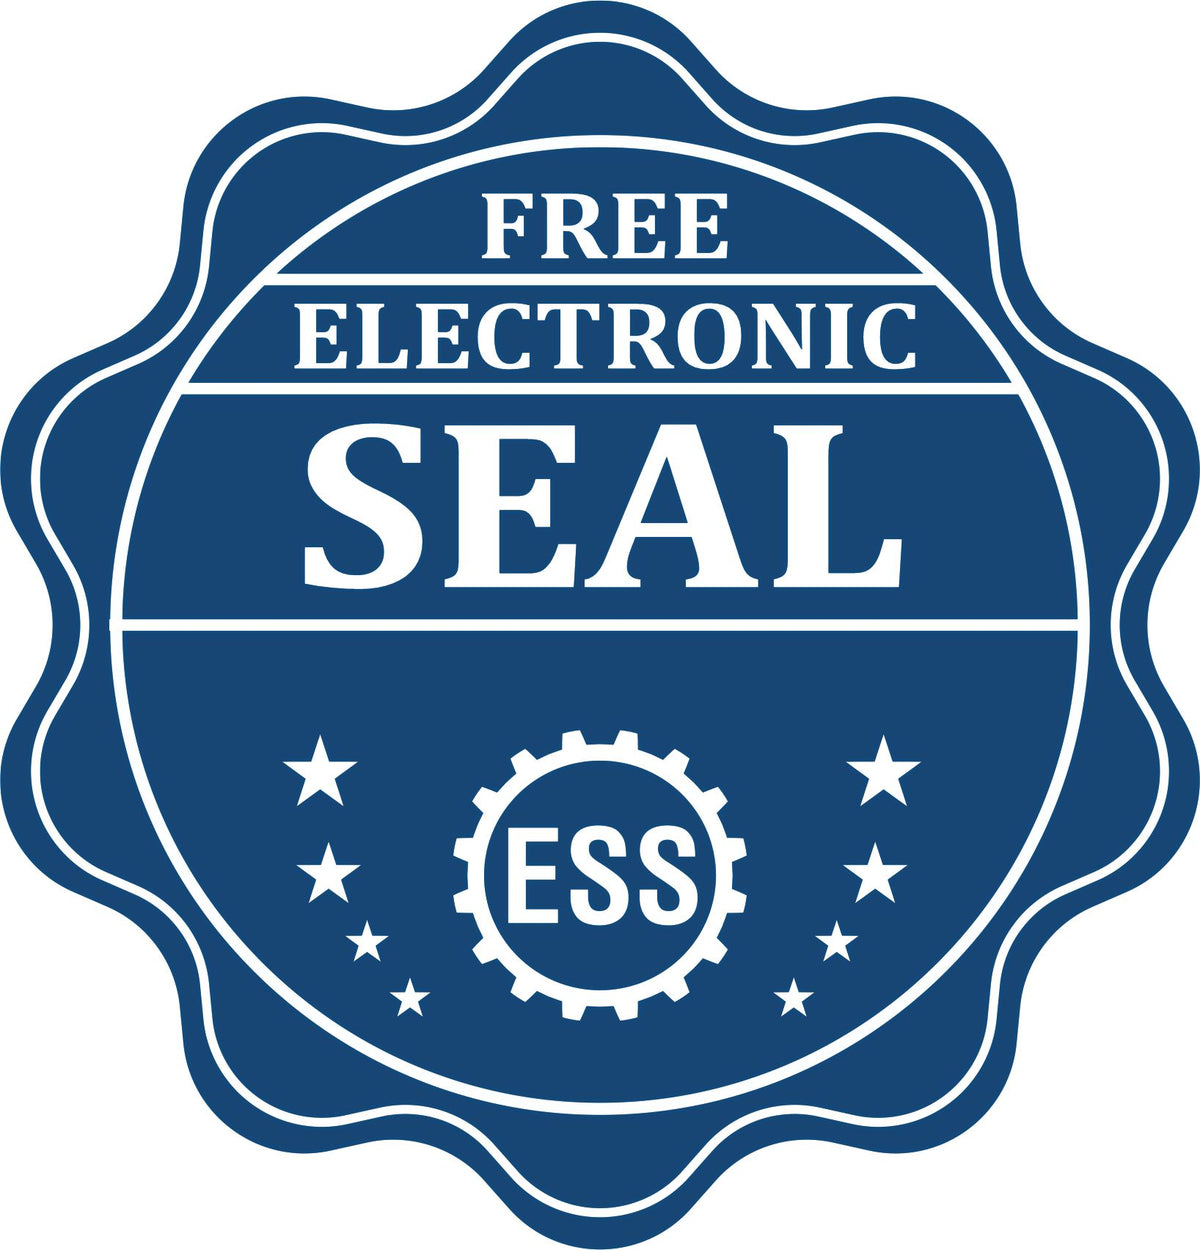 A badge showing a free electronic seal for the Heavy Duty Cast Iron Illinois Architect Embosser with stars and the ESS gear on the emblem.